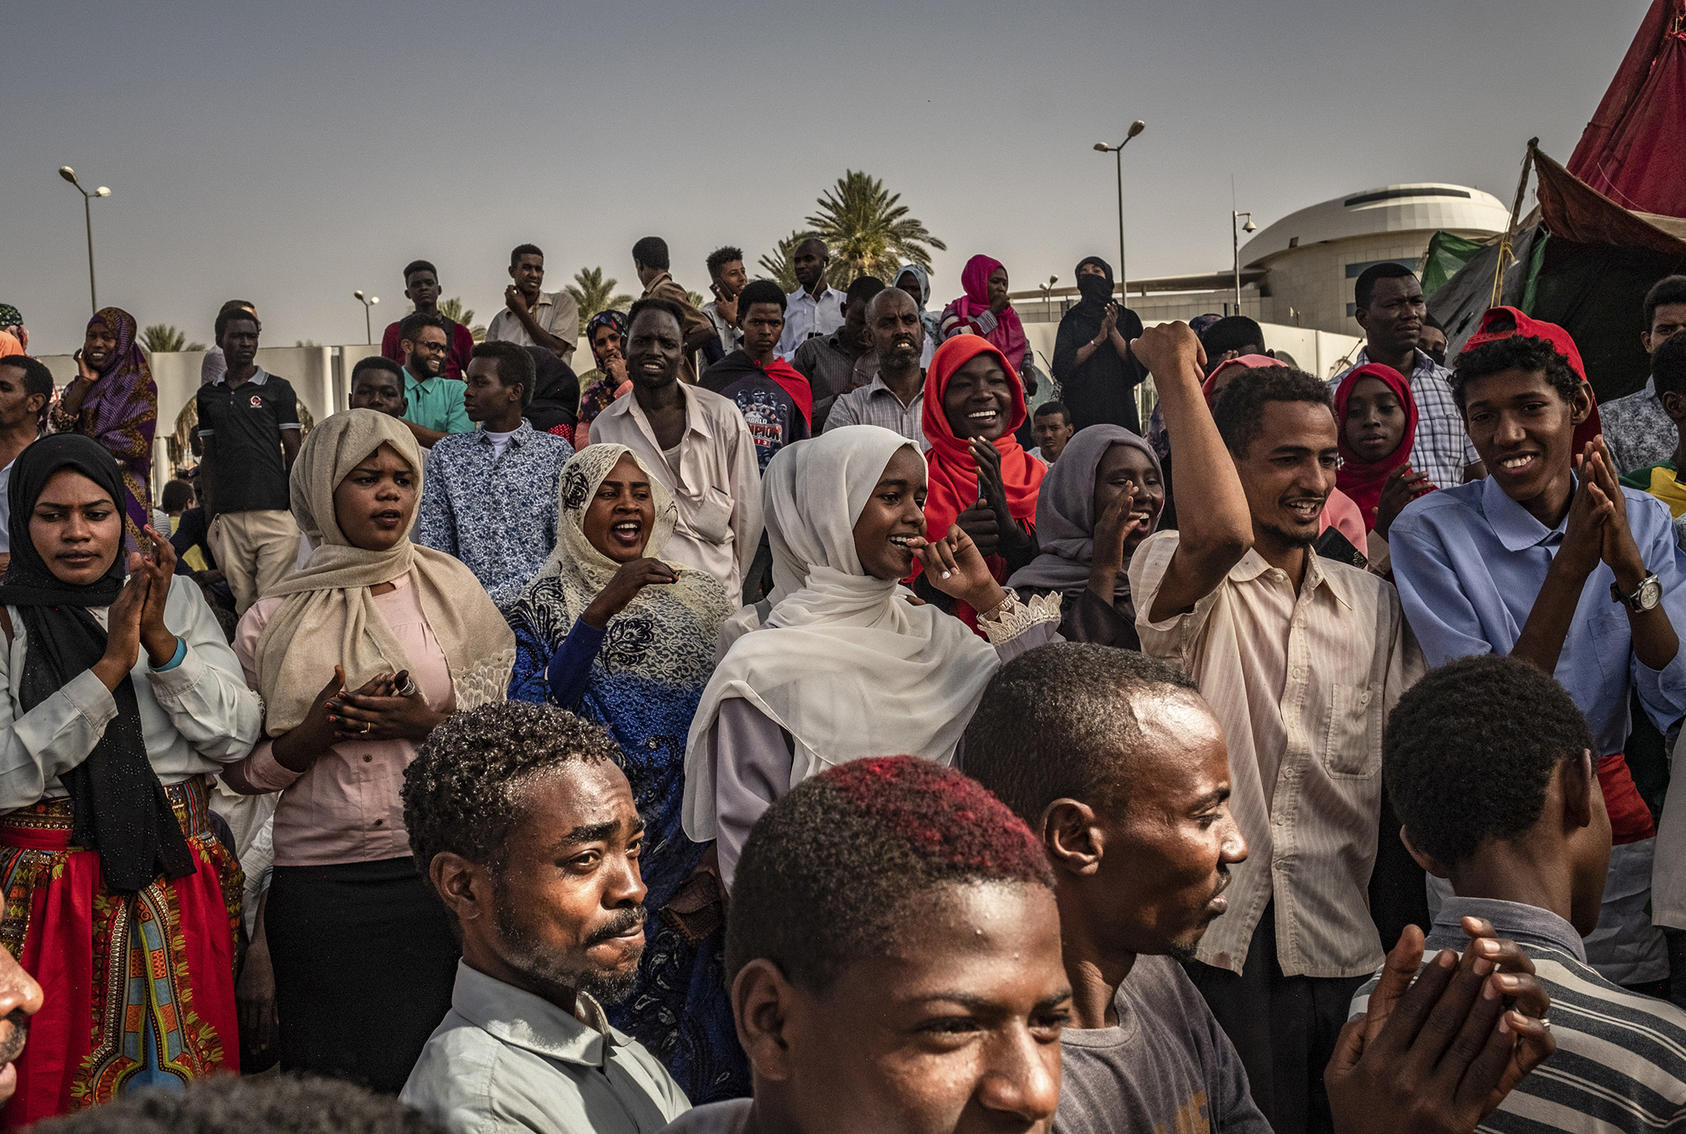 Men and women listen to music, sing and chant during a sit-in at the military headquarters in Khartoum, Sudan, April 27, 2019. (Bryan Denton/The New York Times)